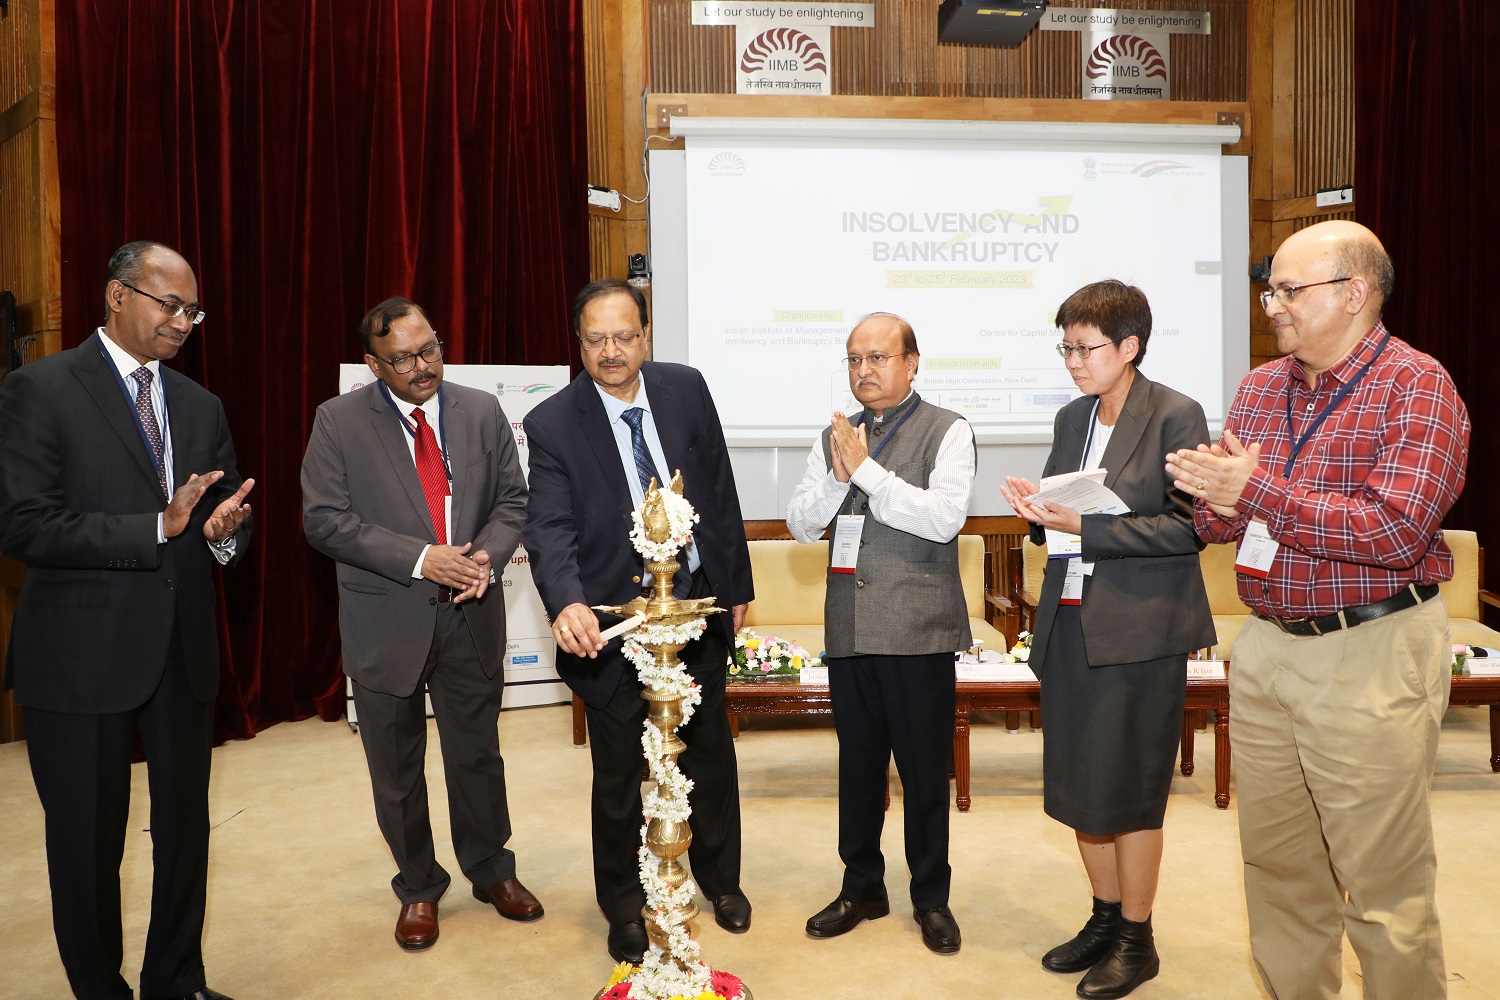 Hon’ble Chief Justice (former) Ramalingam Sudhakar, President, National Company Law Tribunal, inaugurates the three-day second International Research Conference on Insolvency and Bankruptcy organized by IIMB’s Centre for Capital Markets and Risk Management, in partnership with the Insolvency and Bankruptcy Board of India, on 23rd February 2023. Also present is Prof. Rishikesha T Krishnan, Director, IIM Bangalore, along with other dignitaries.